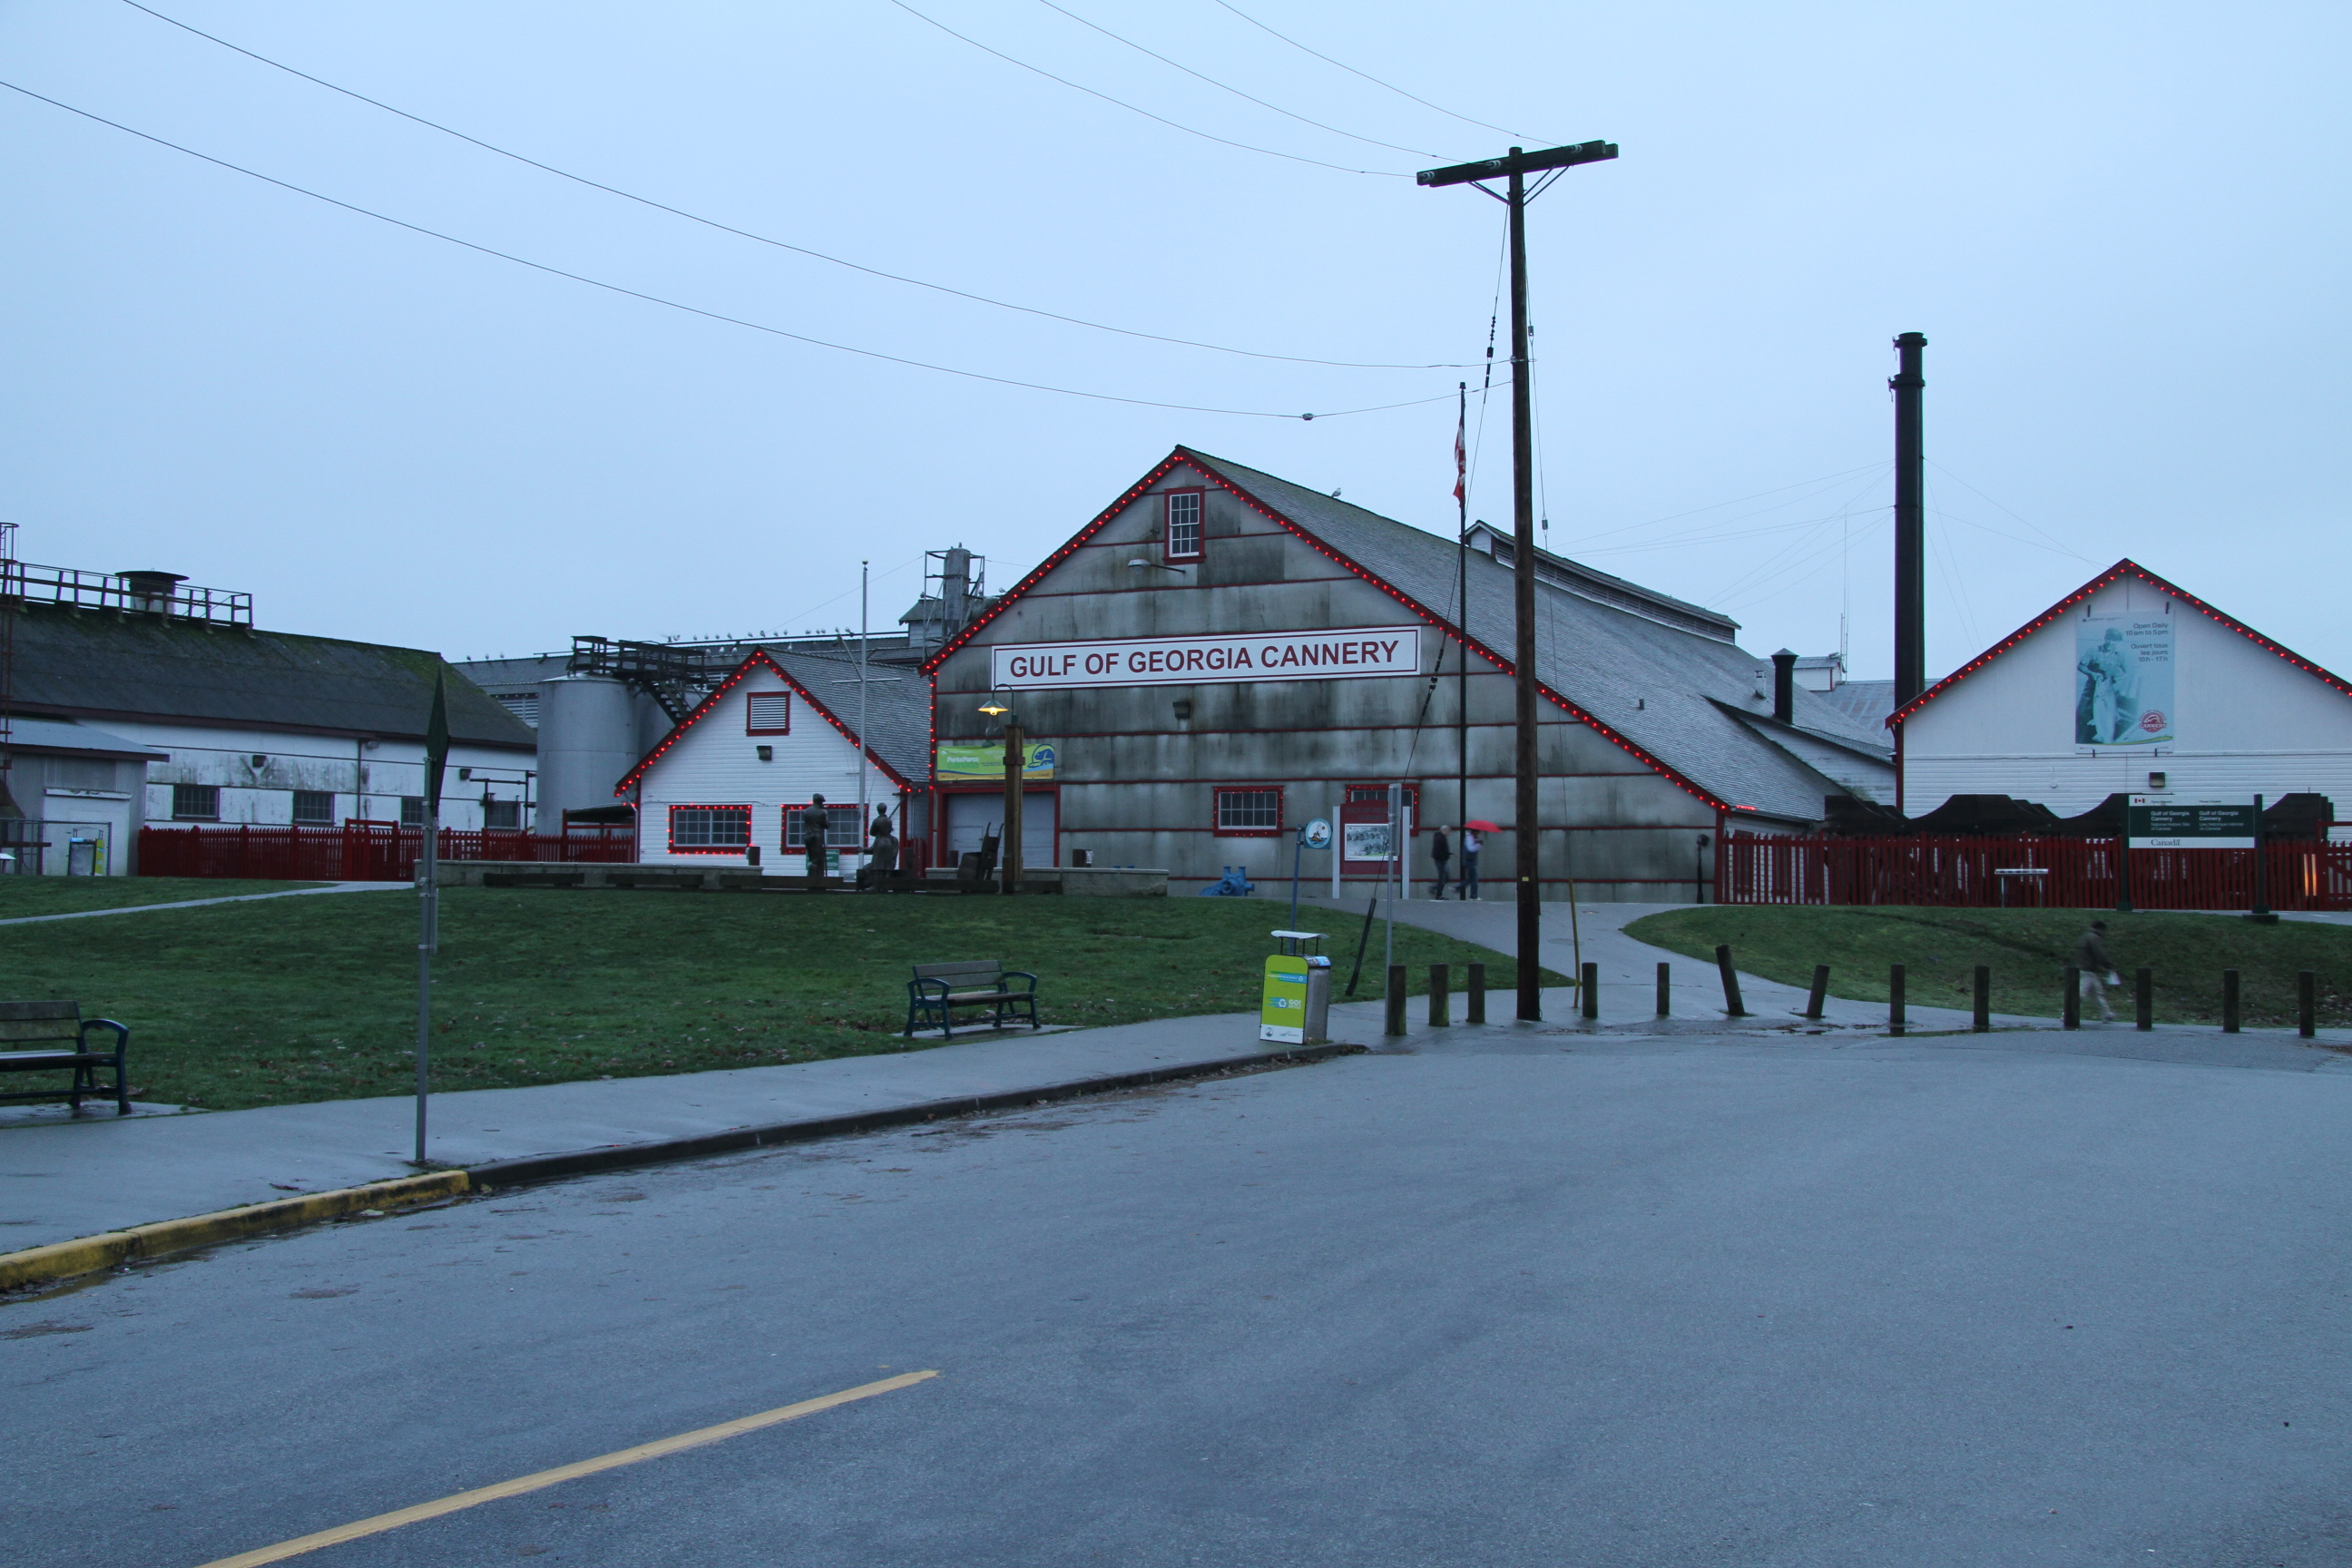 Gulf of Georgia Cannery on Boxing Day 2012